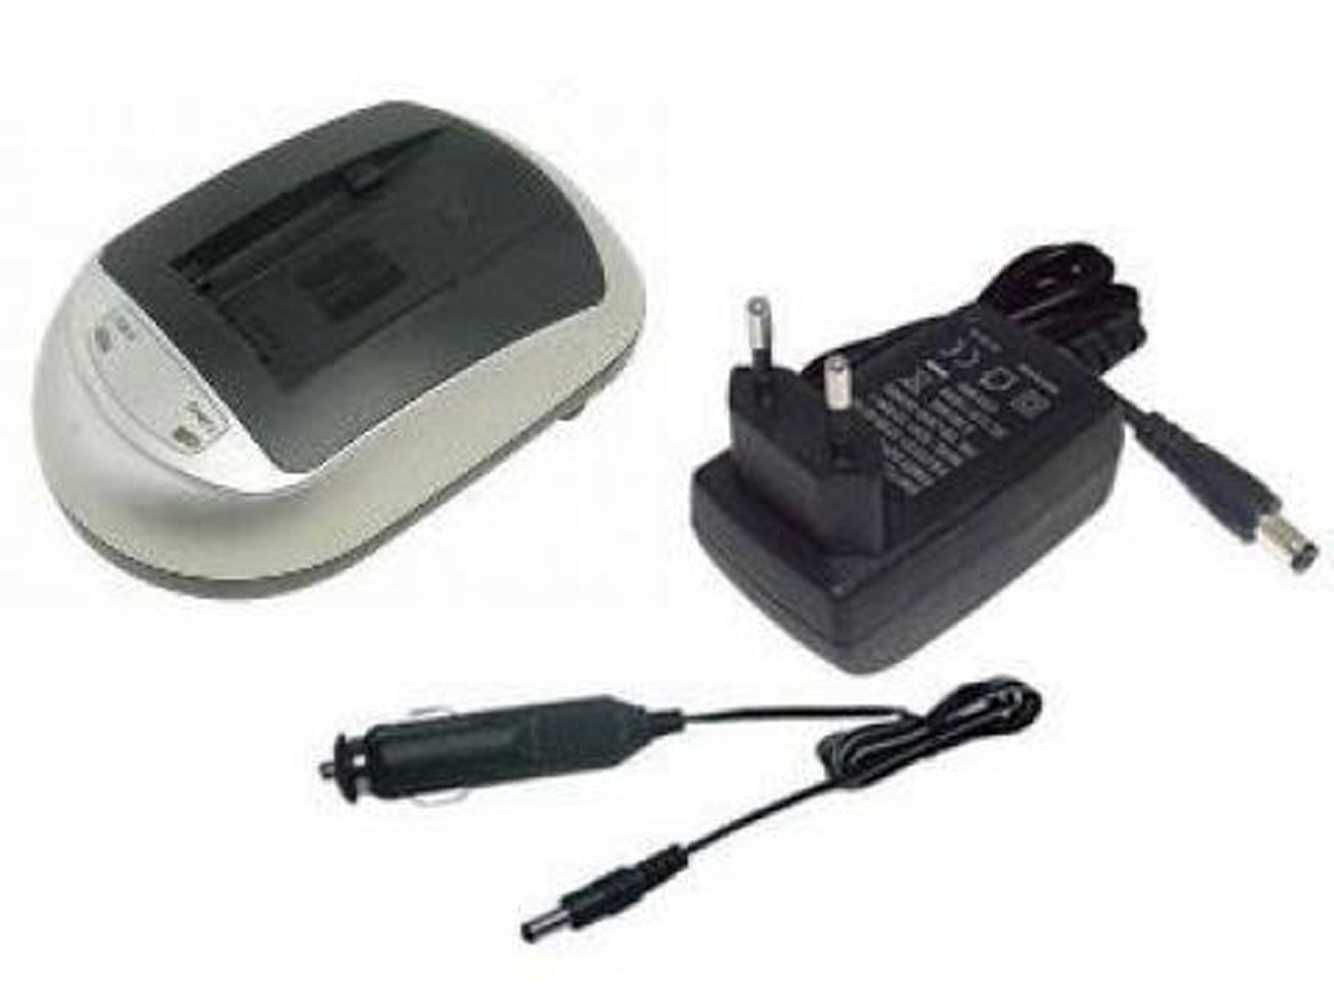 Sony Np-fh100, Np-fh30 Battery Chargers For Cyber-shot Dsc-hx100v, Cyber-shot Dsc-hx200v replacement